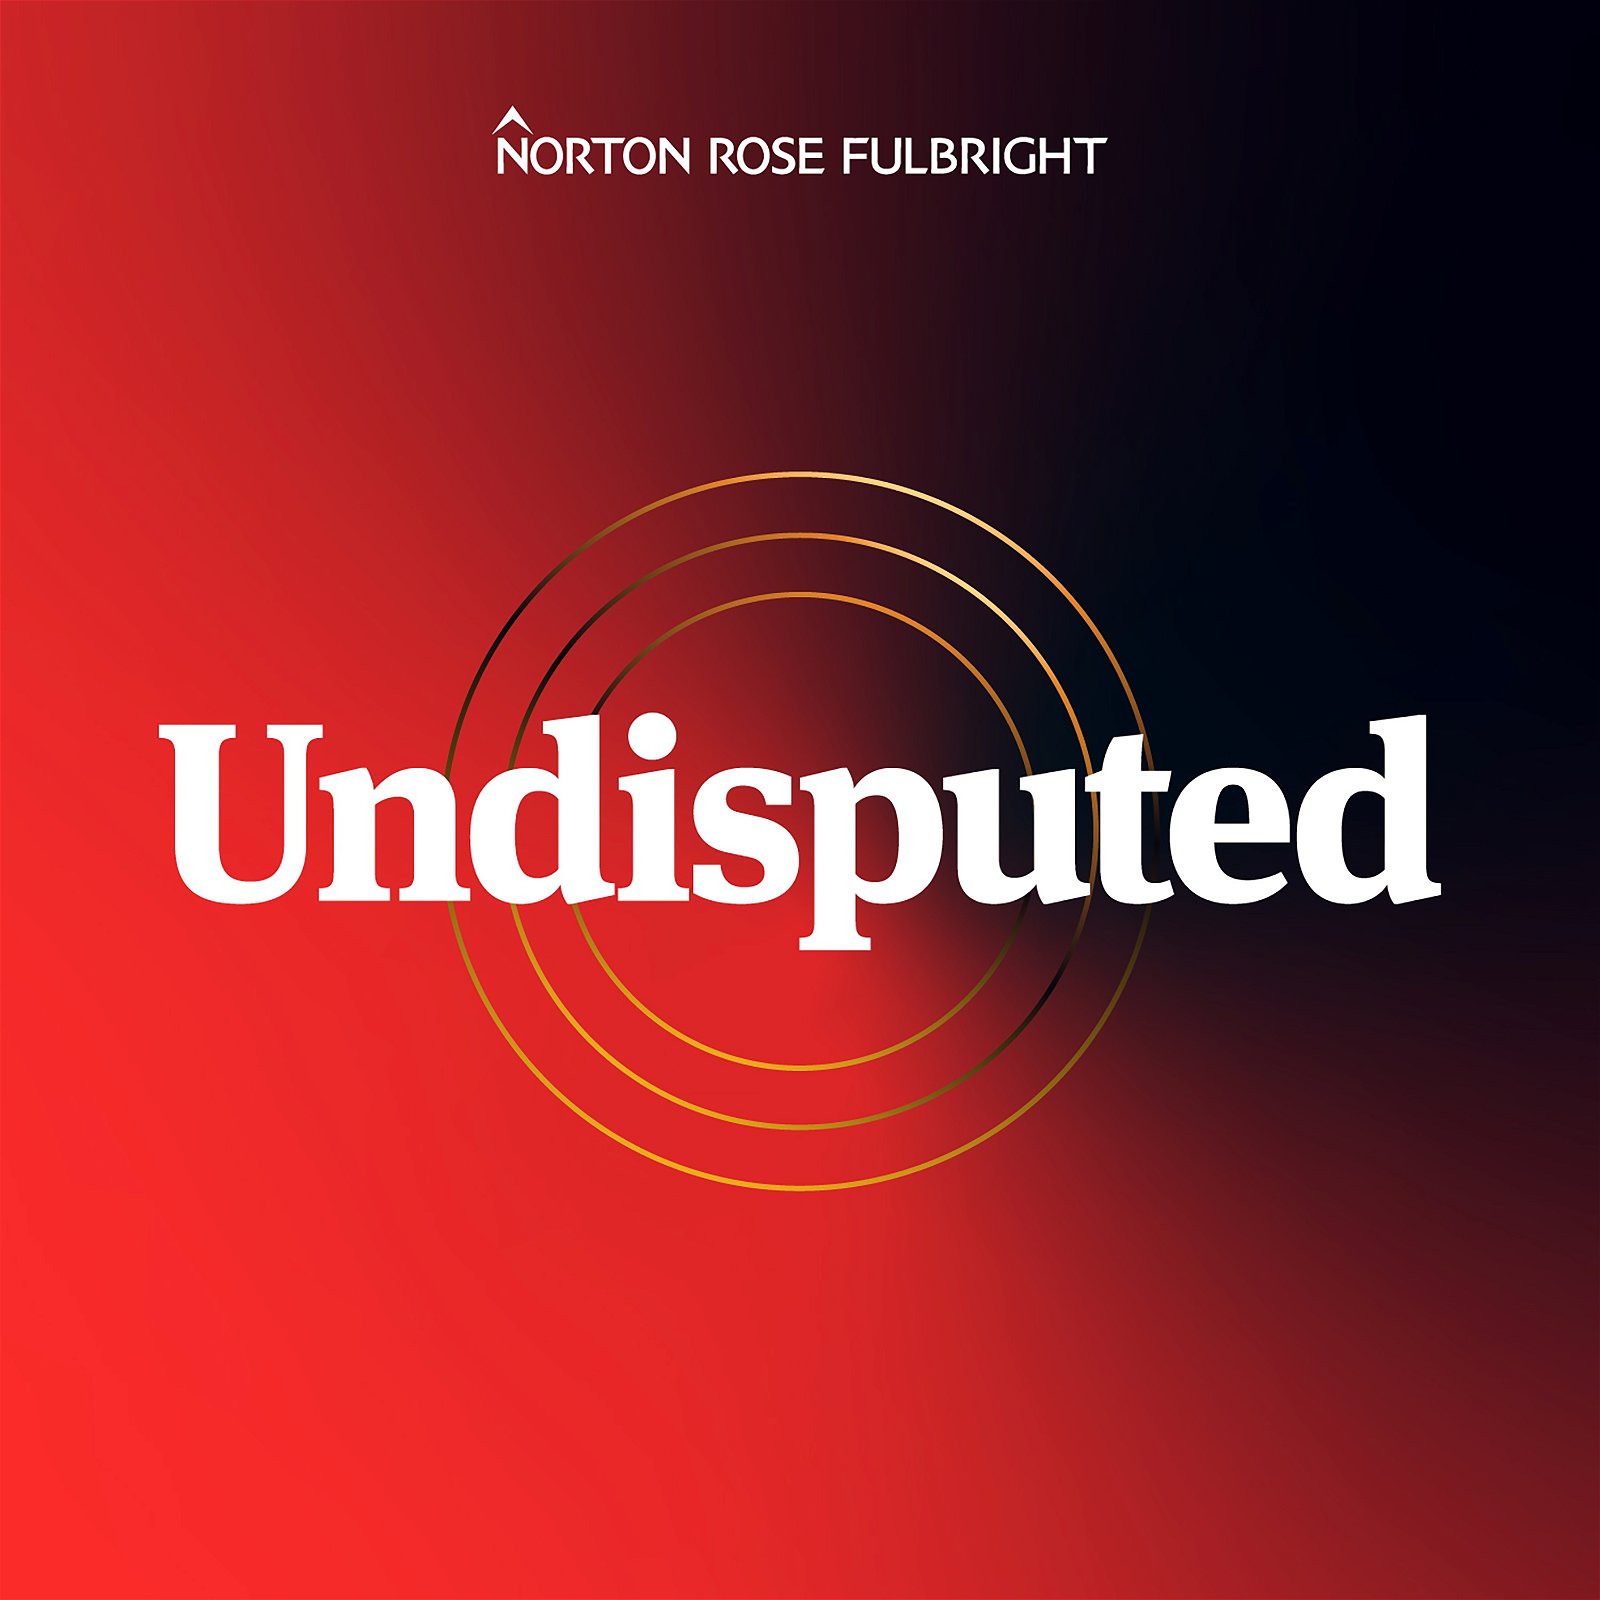 Undisputed: Litigation Trends Explored - A miniseries from the makers of Disputed